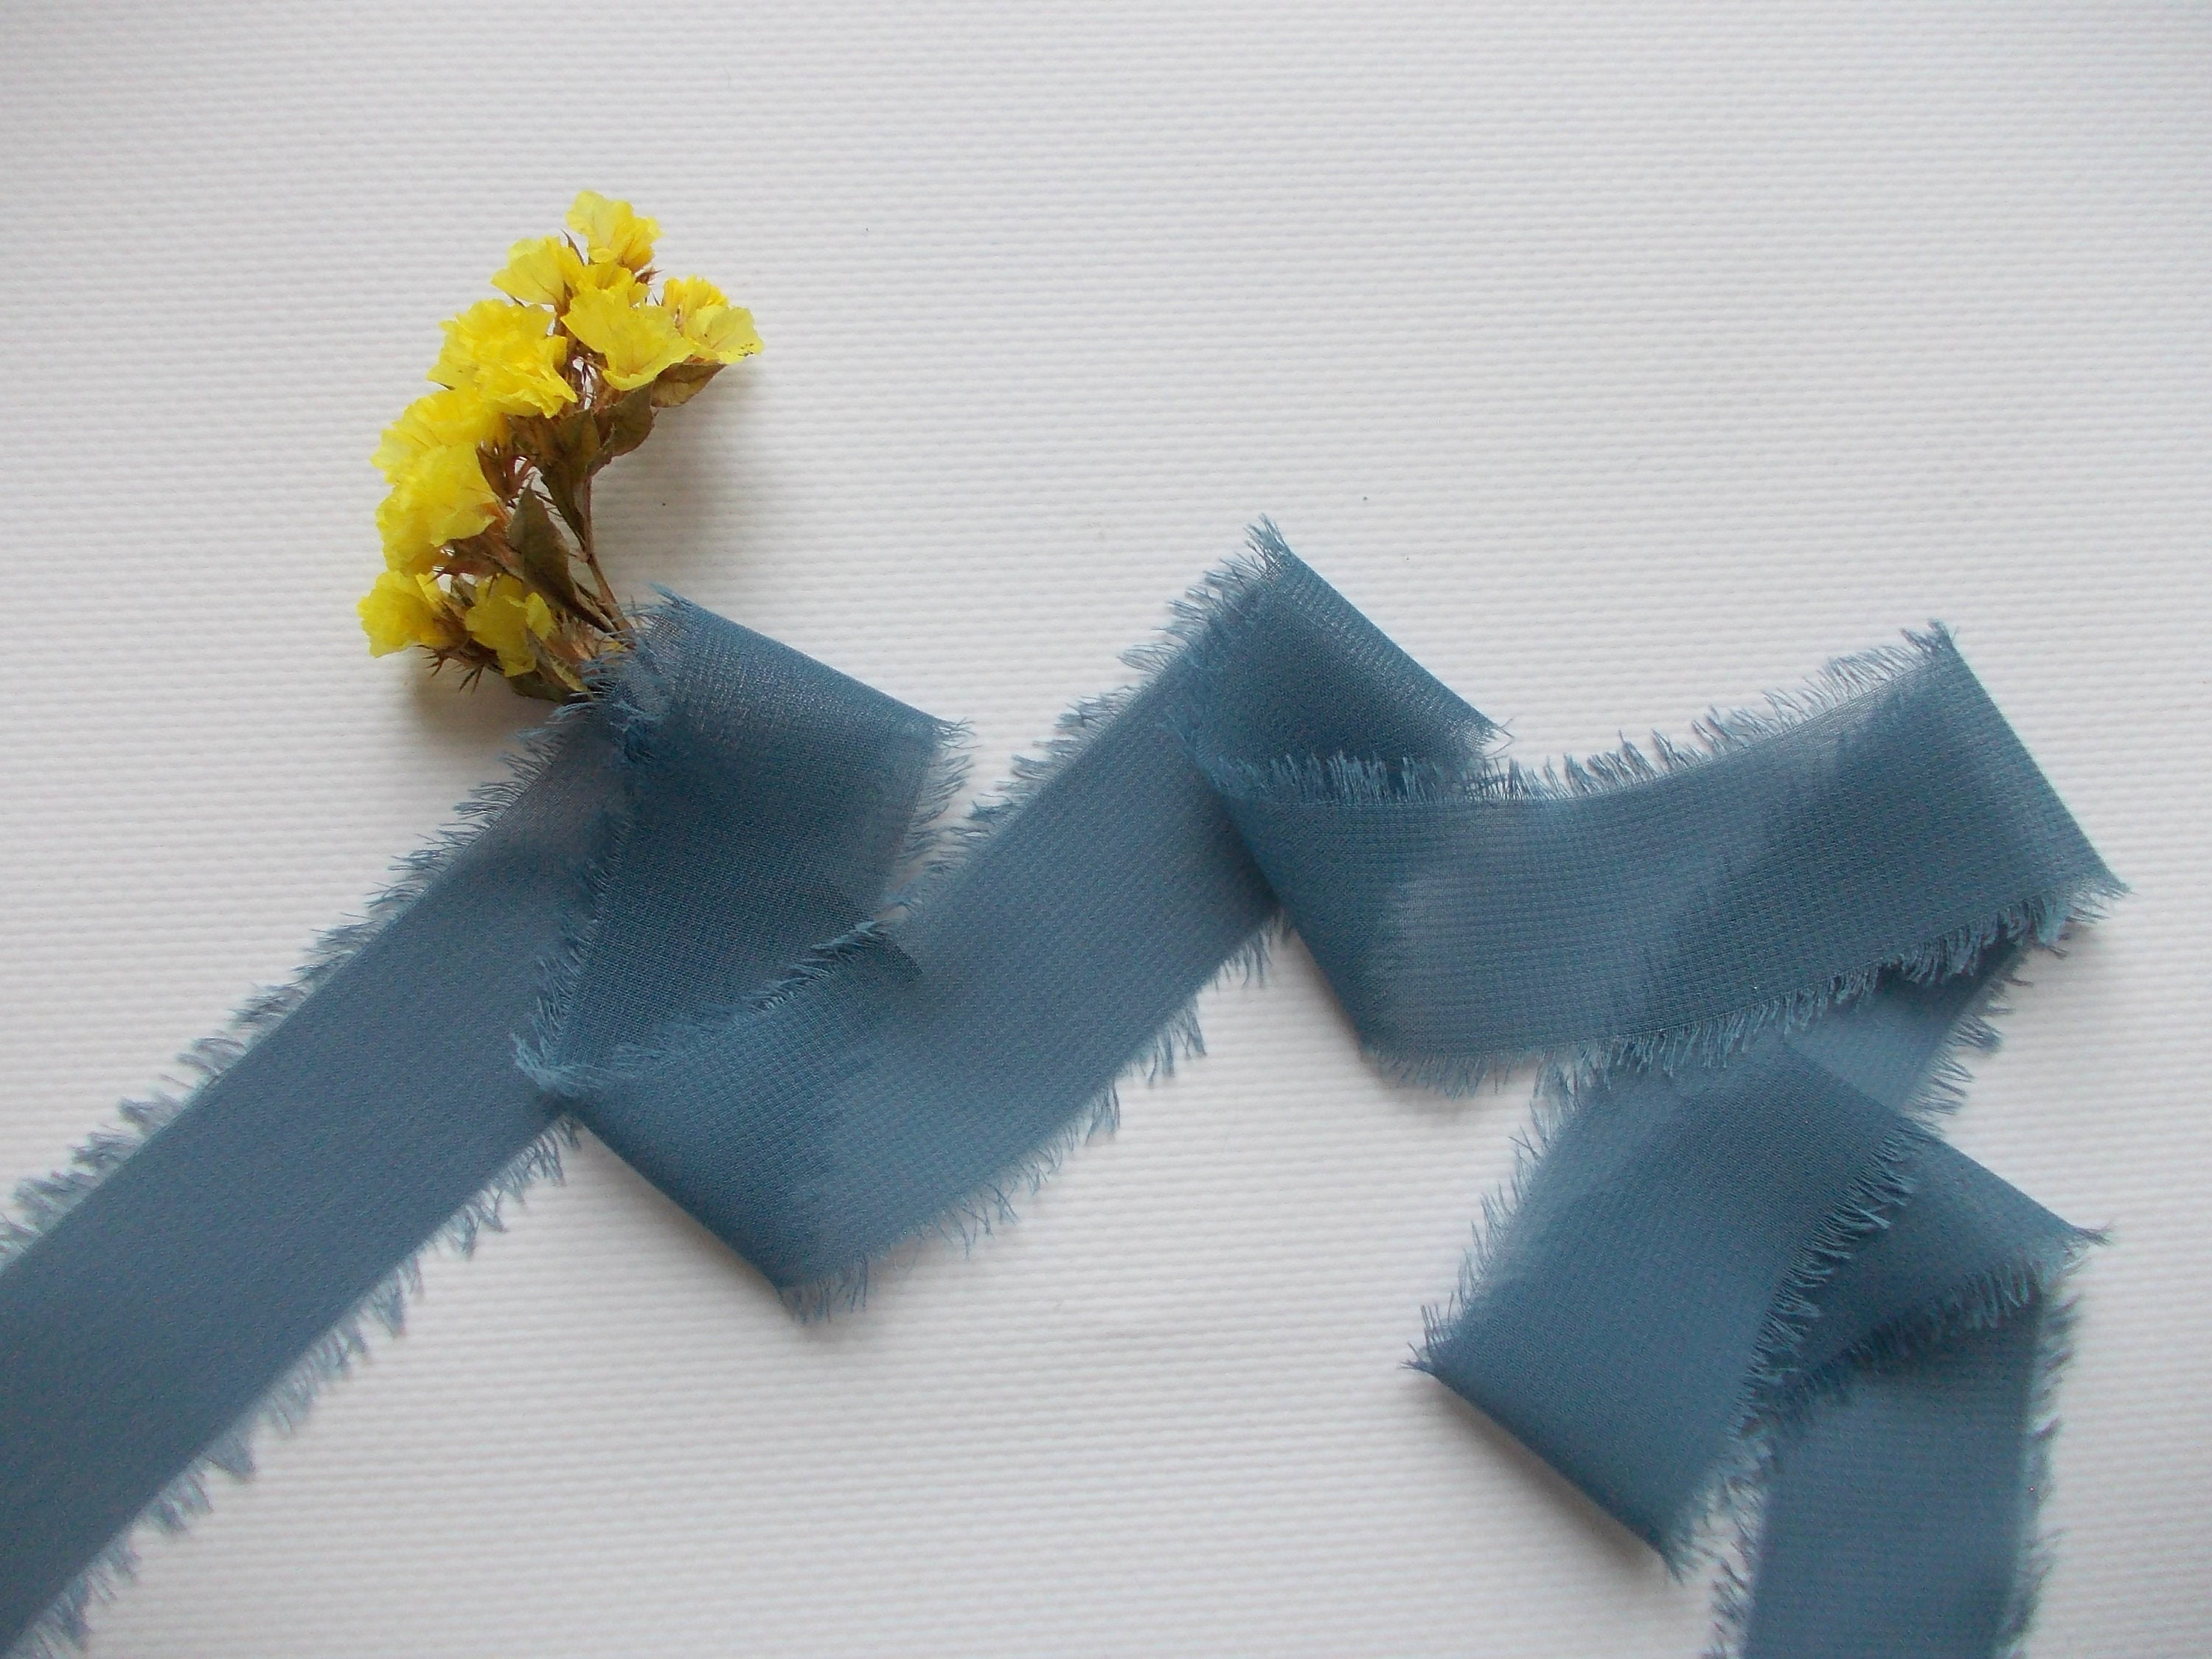 Keypan Dark Blue Ribbon for Gift Wrapping, Silk Satin Chiffon Frayed Fabric  Ribbons for Crafts Flower Bouquets Wedding Invitation Decor Baby Shower